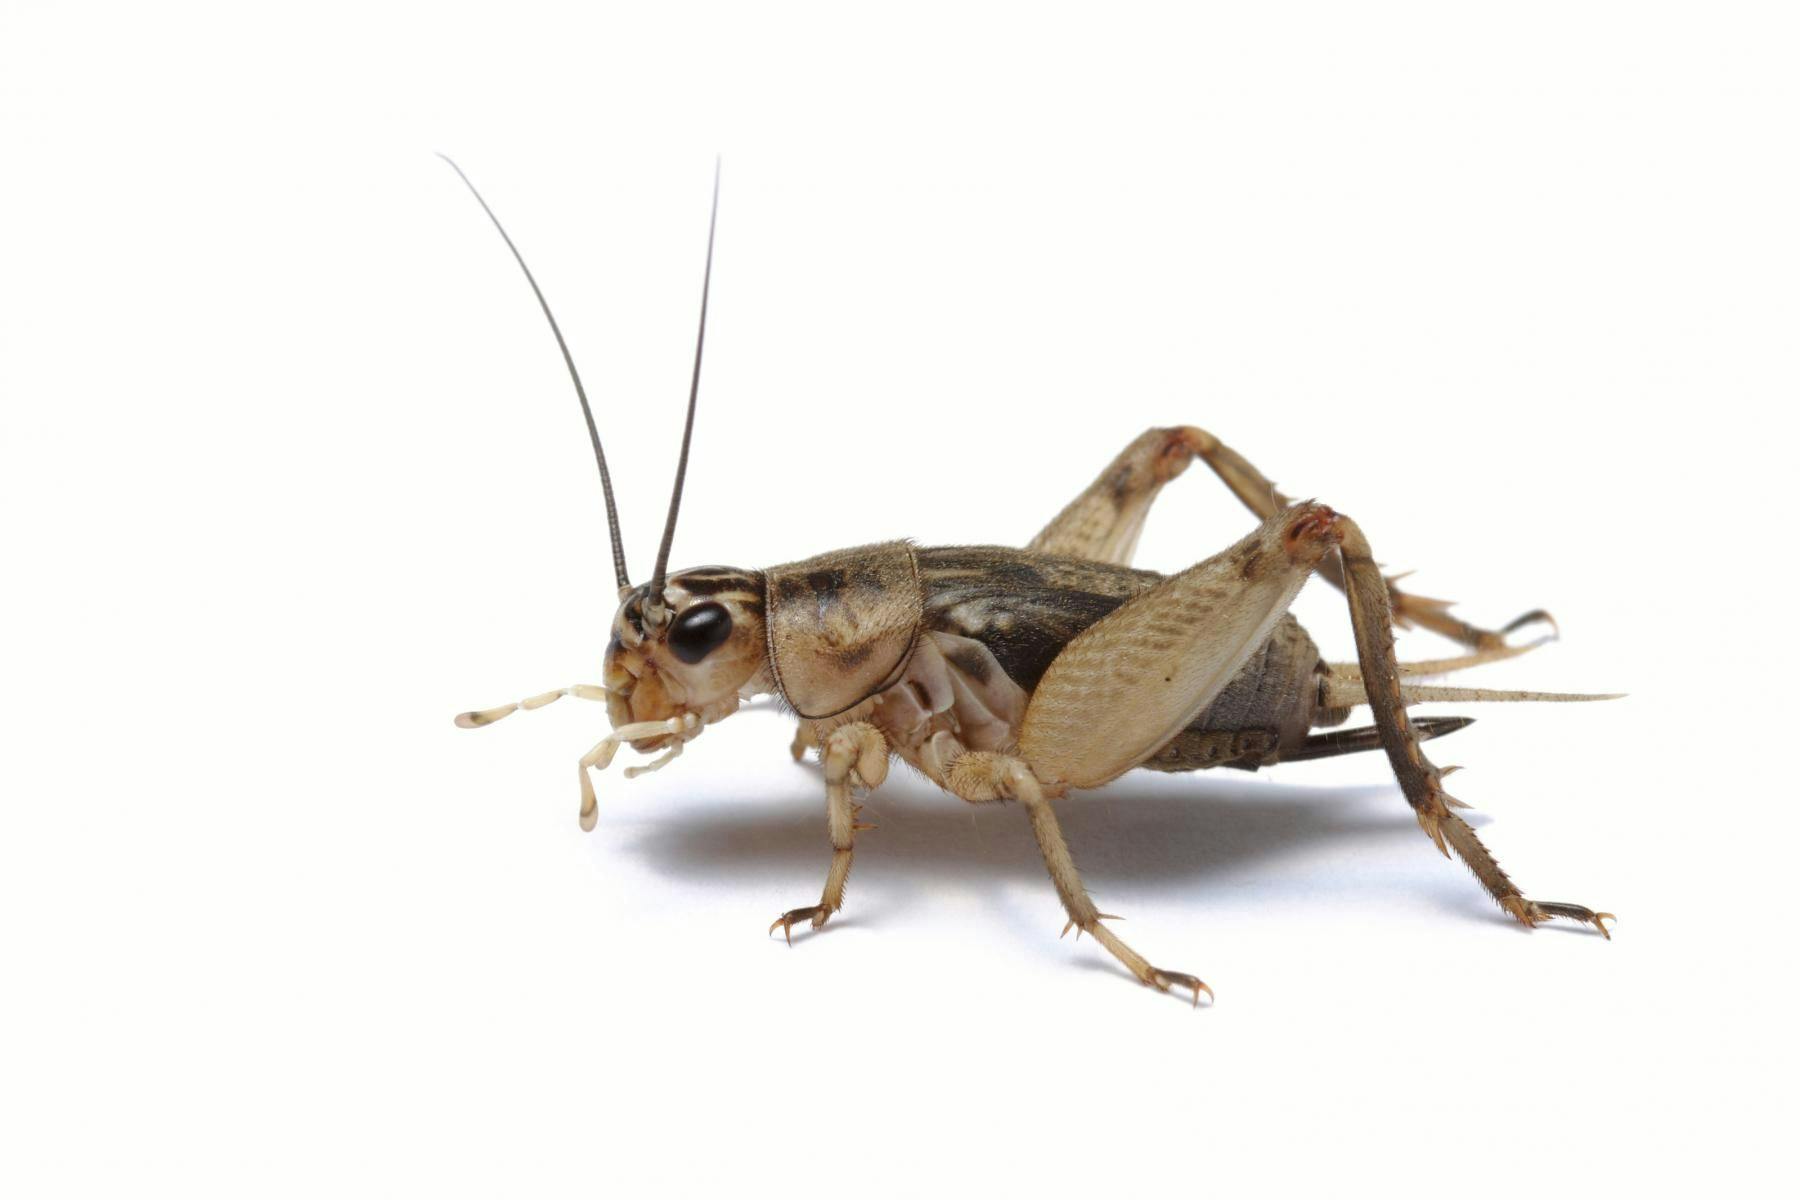 Ready to Eat Insects: Crickets and Grasshoppers